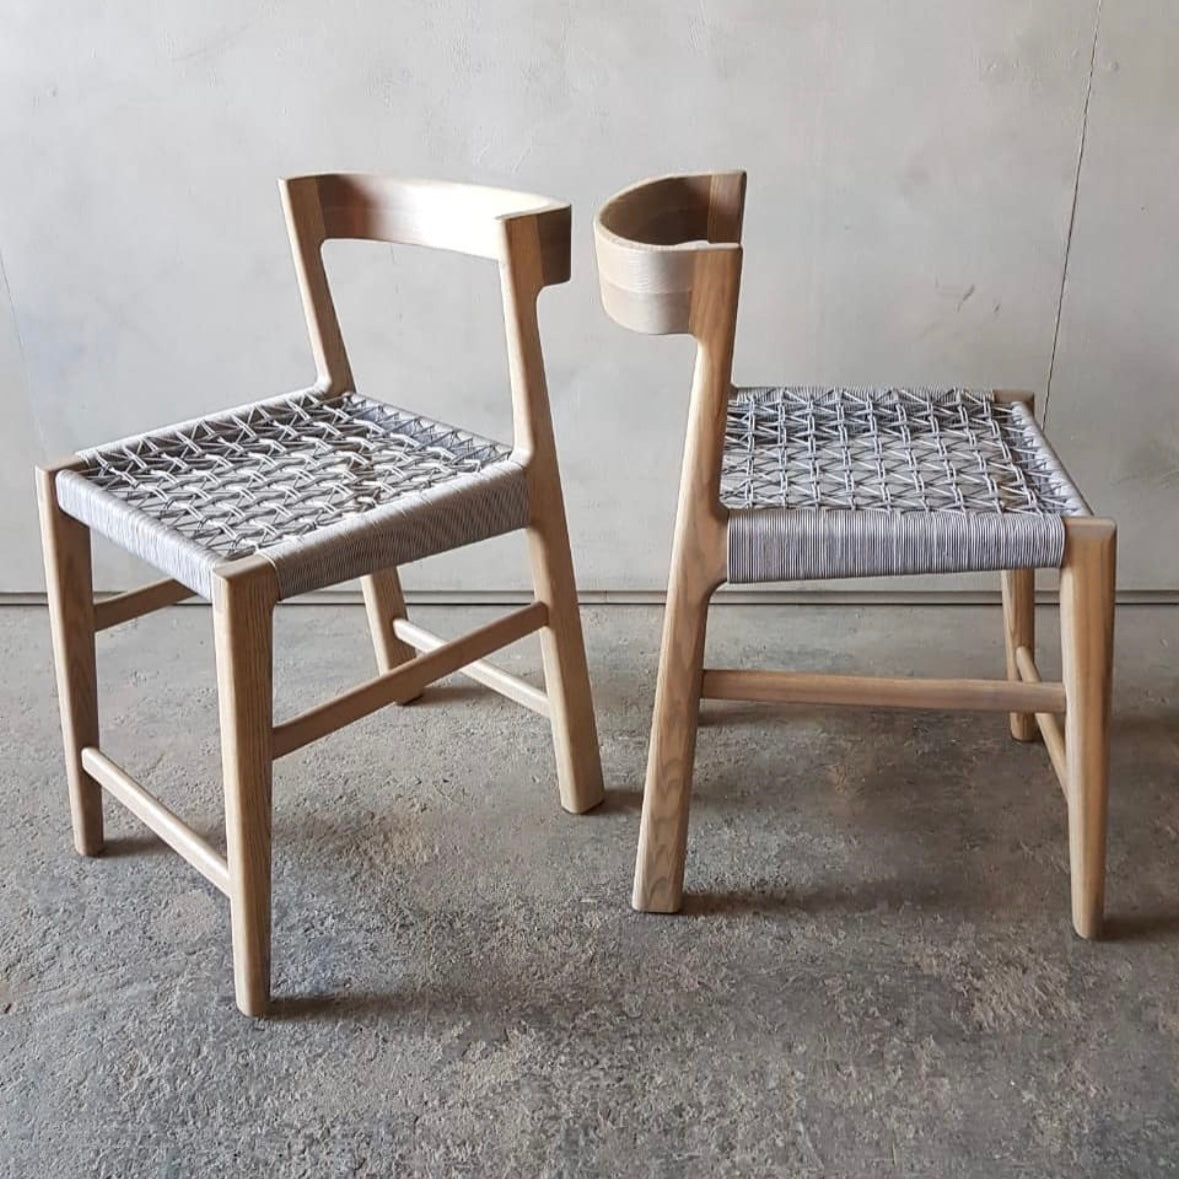 The Odi Barstool by Vogel Furniture Design. Made from a selection of timbers and finishes, it features a comfy woven base, in an assortment of patterns, weaves and colors.